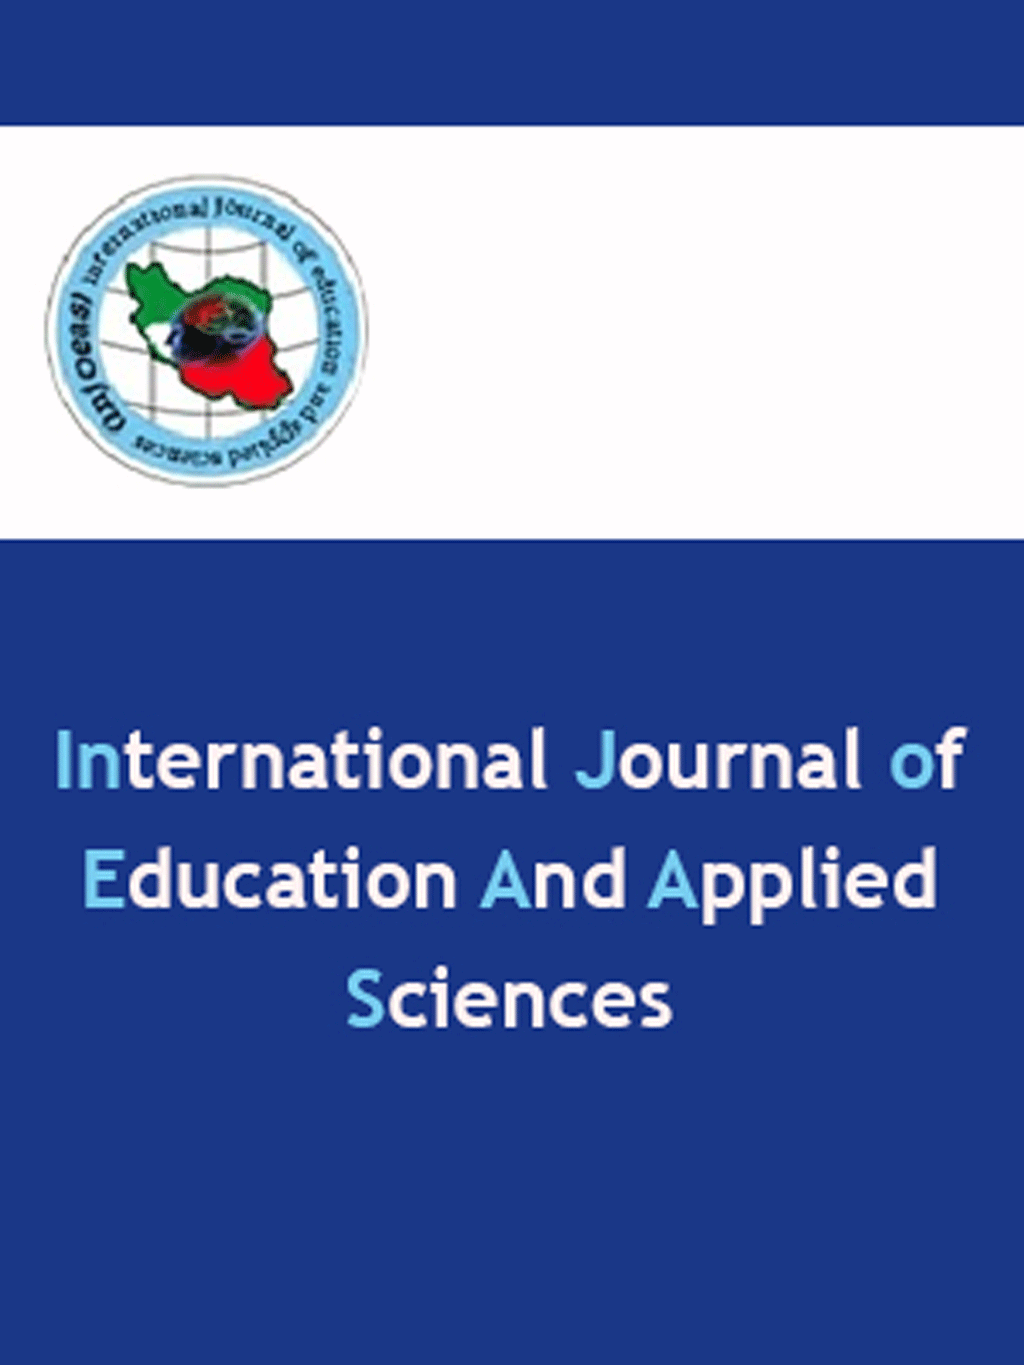 Education and Applied Sciences - October 2022, Volume 3 - Number 3